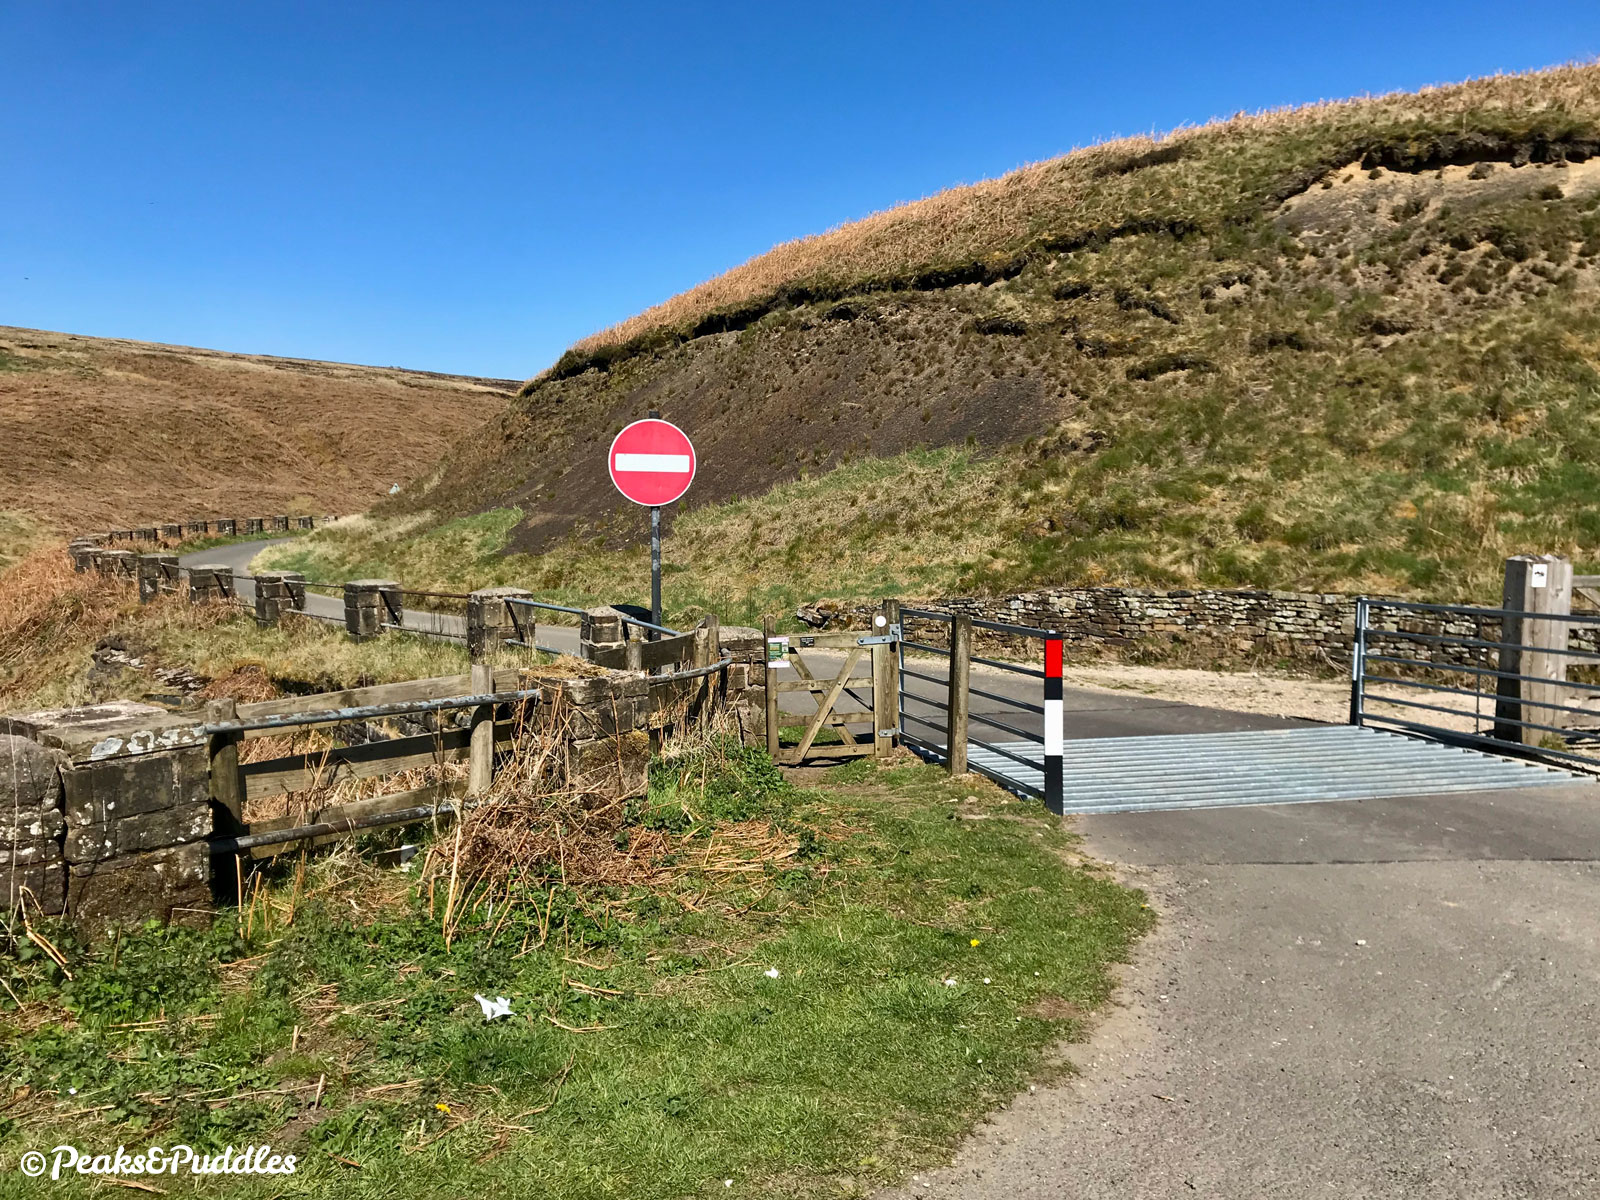 No way back: the one-way traffic regulation order imposed since 1980 has (legally, at least) blocked a vital cycle link back from the Peak District for over 40 years.